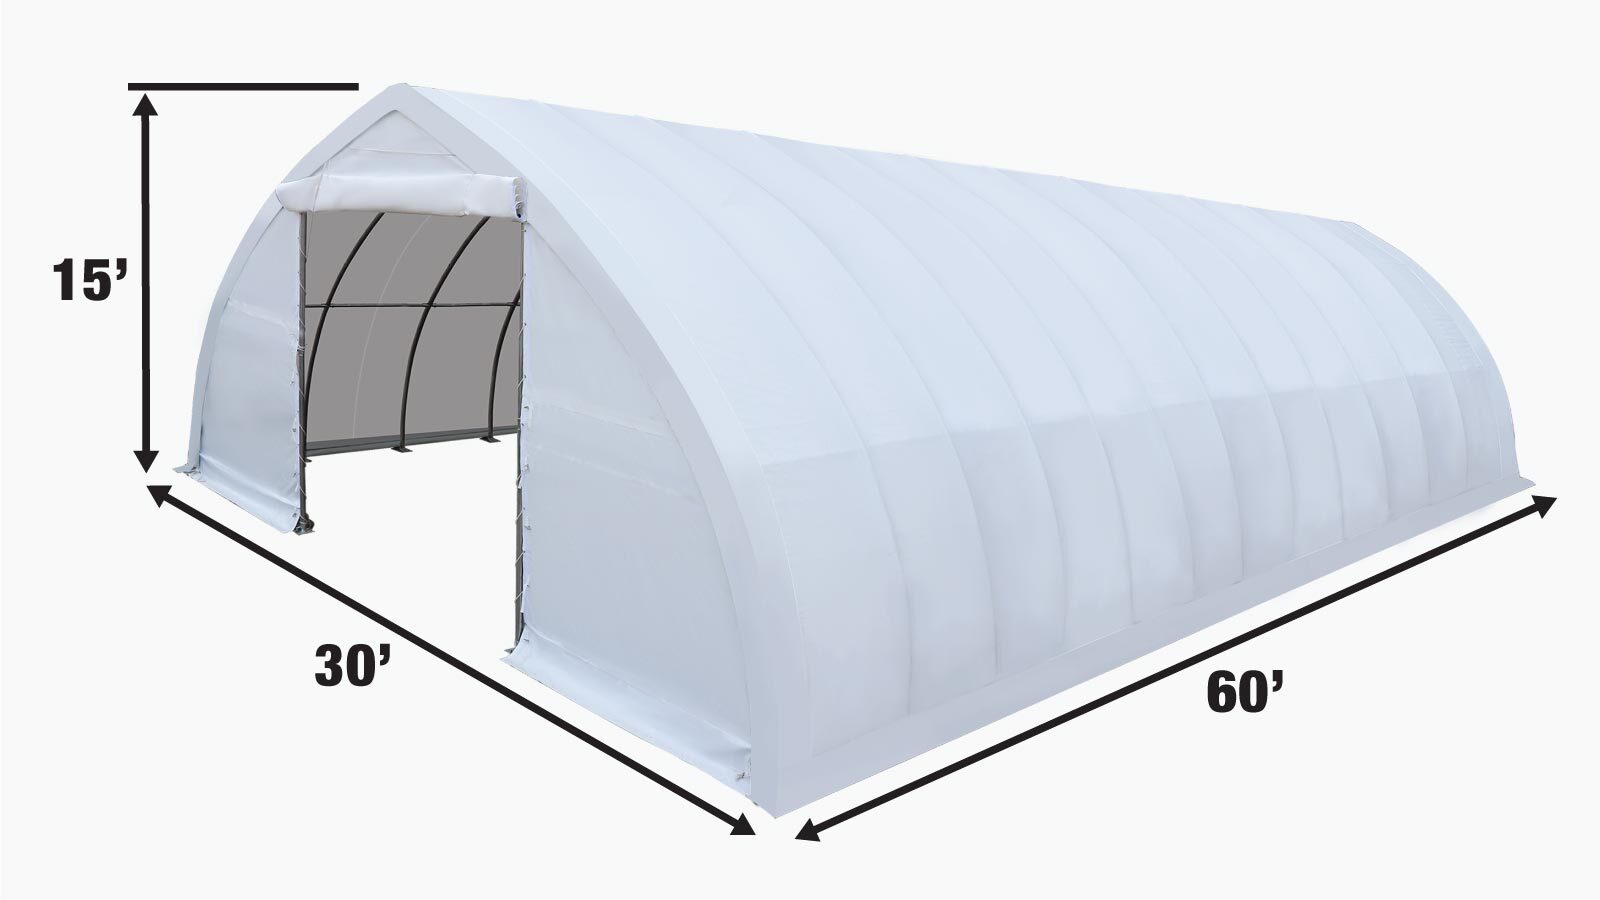 TMG Industrial 30' x 60' Peak Ceiling Storage Shelter with Heavy Duty 17 oz PVC Cover & Drive Through Doors, TMG-ST3060V-specifications-image